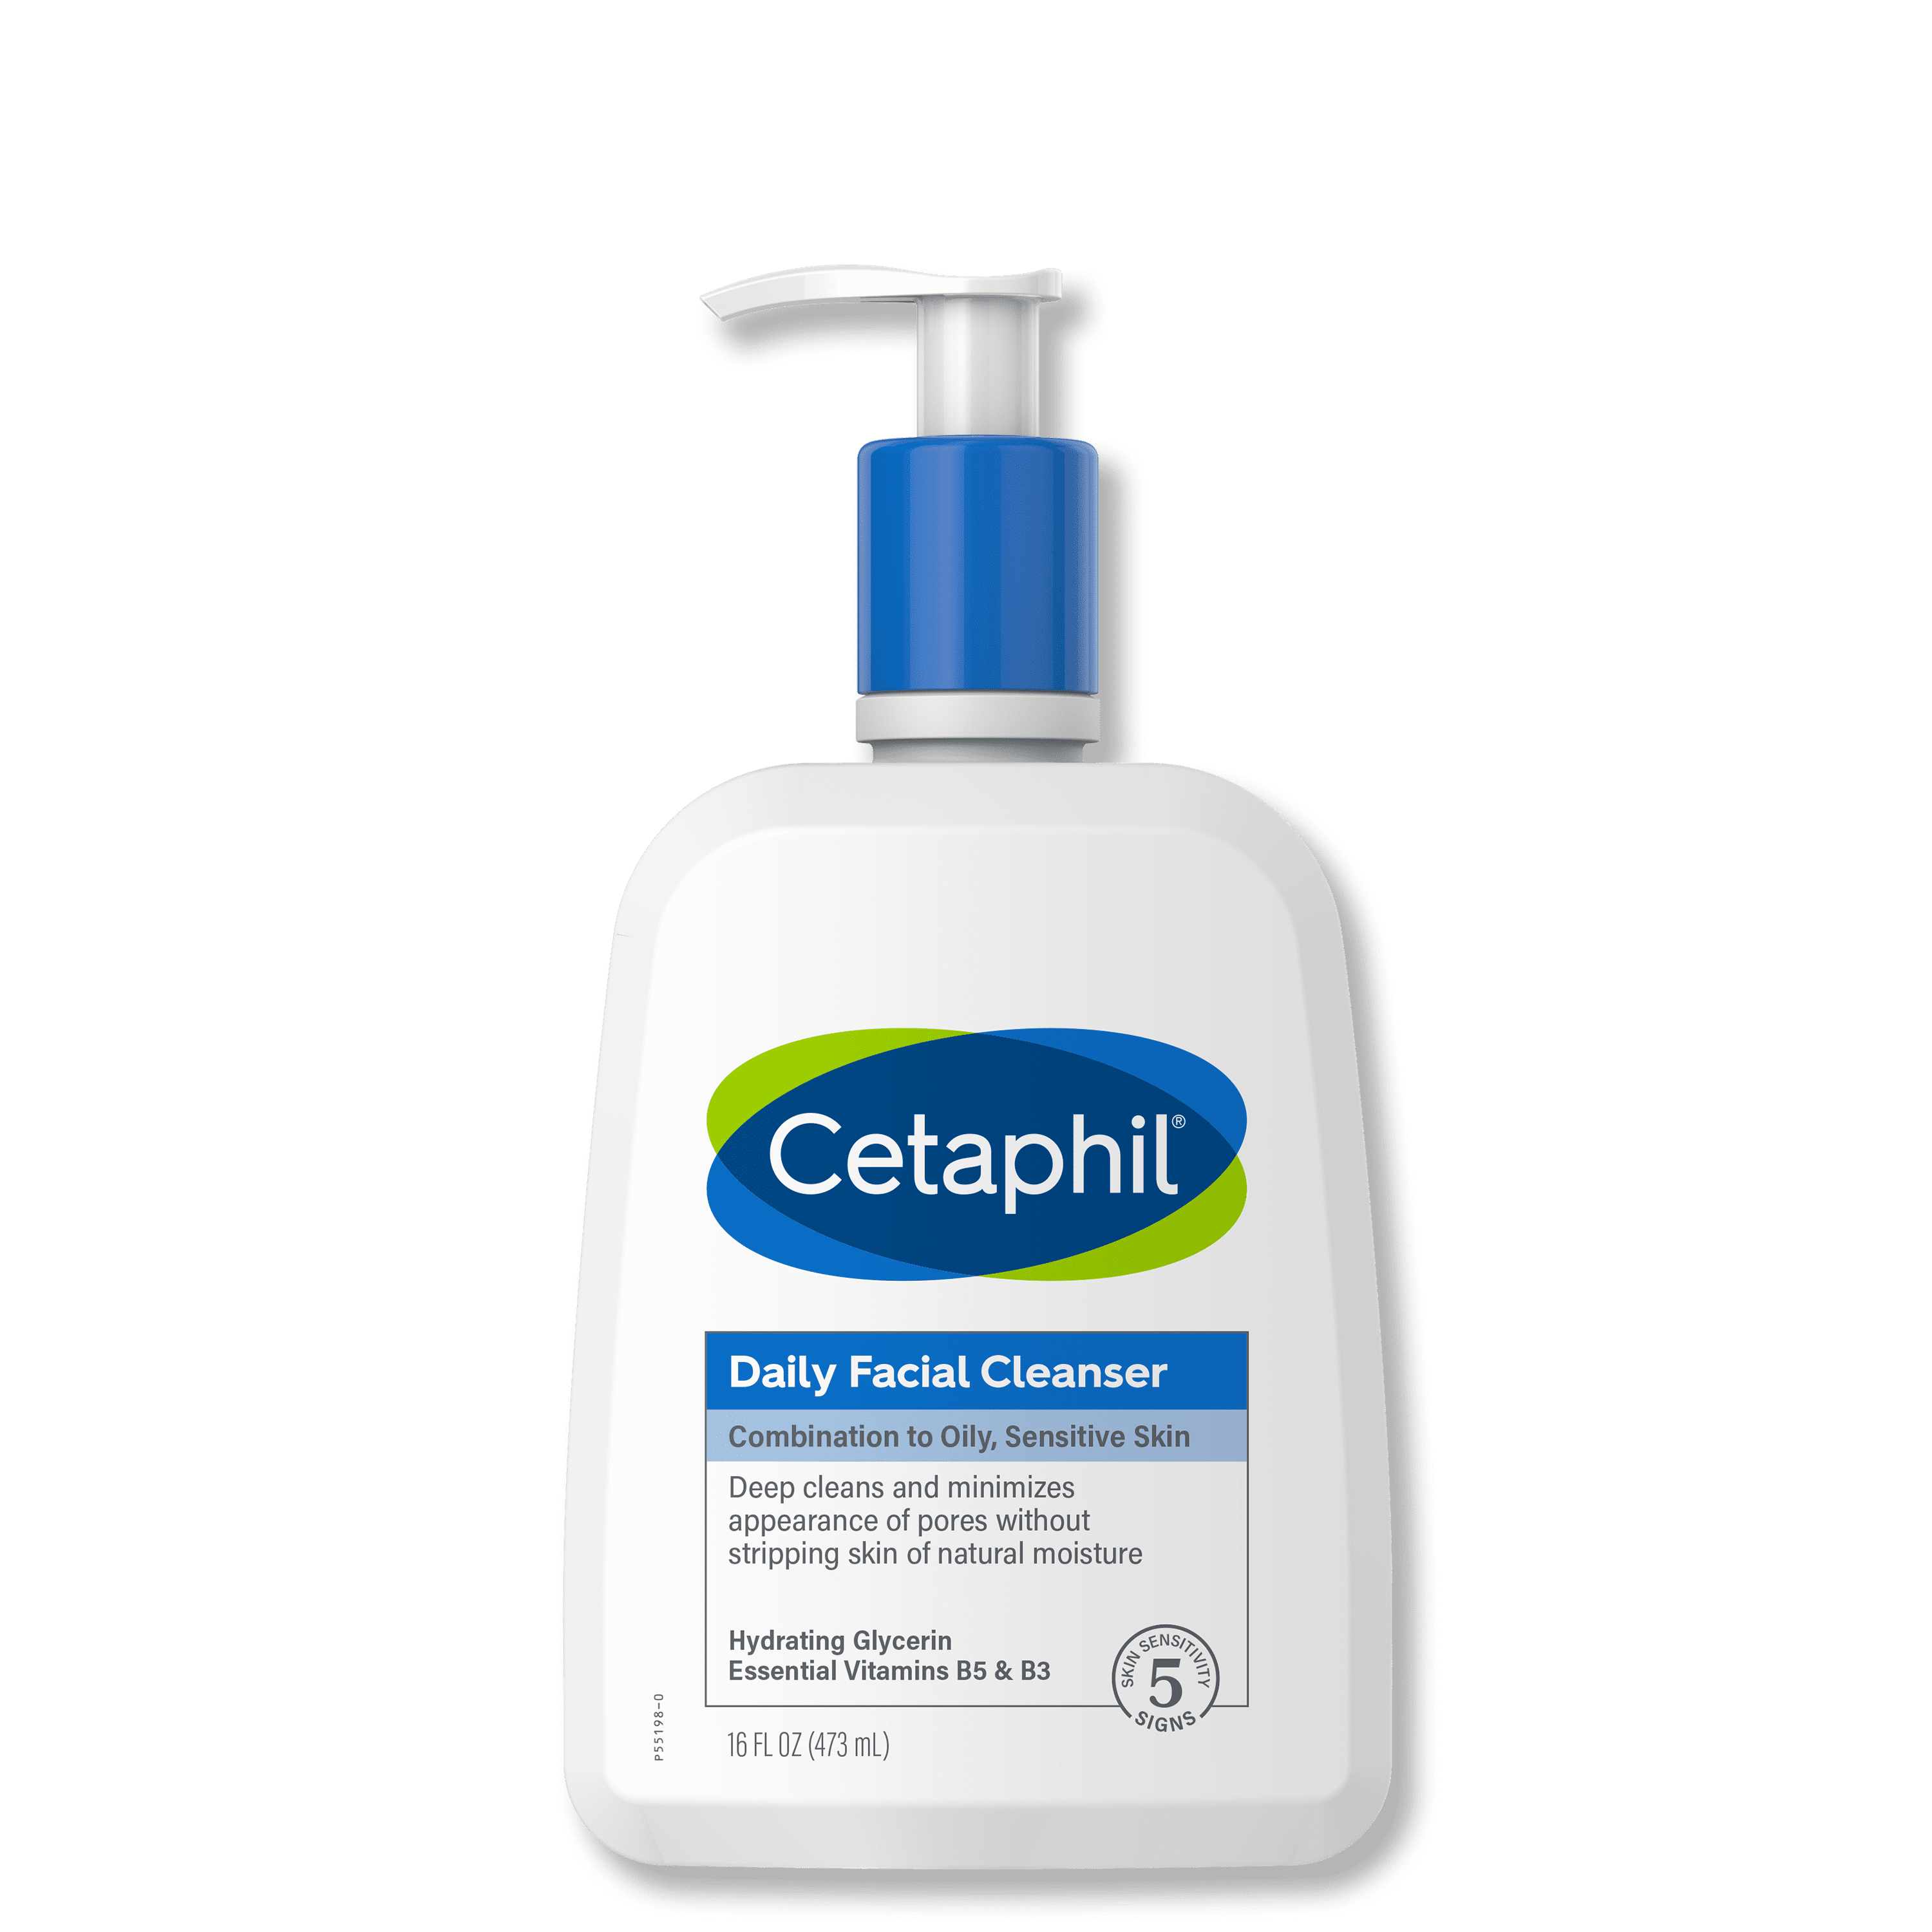 Cetaphil Daily Facial Cleanser, Combination to Oily, Sensitive Skin, 16oz